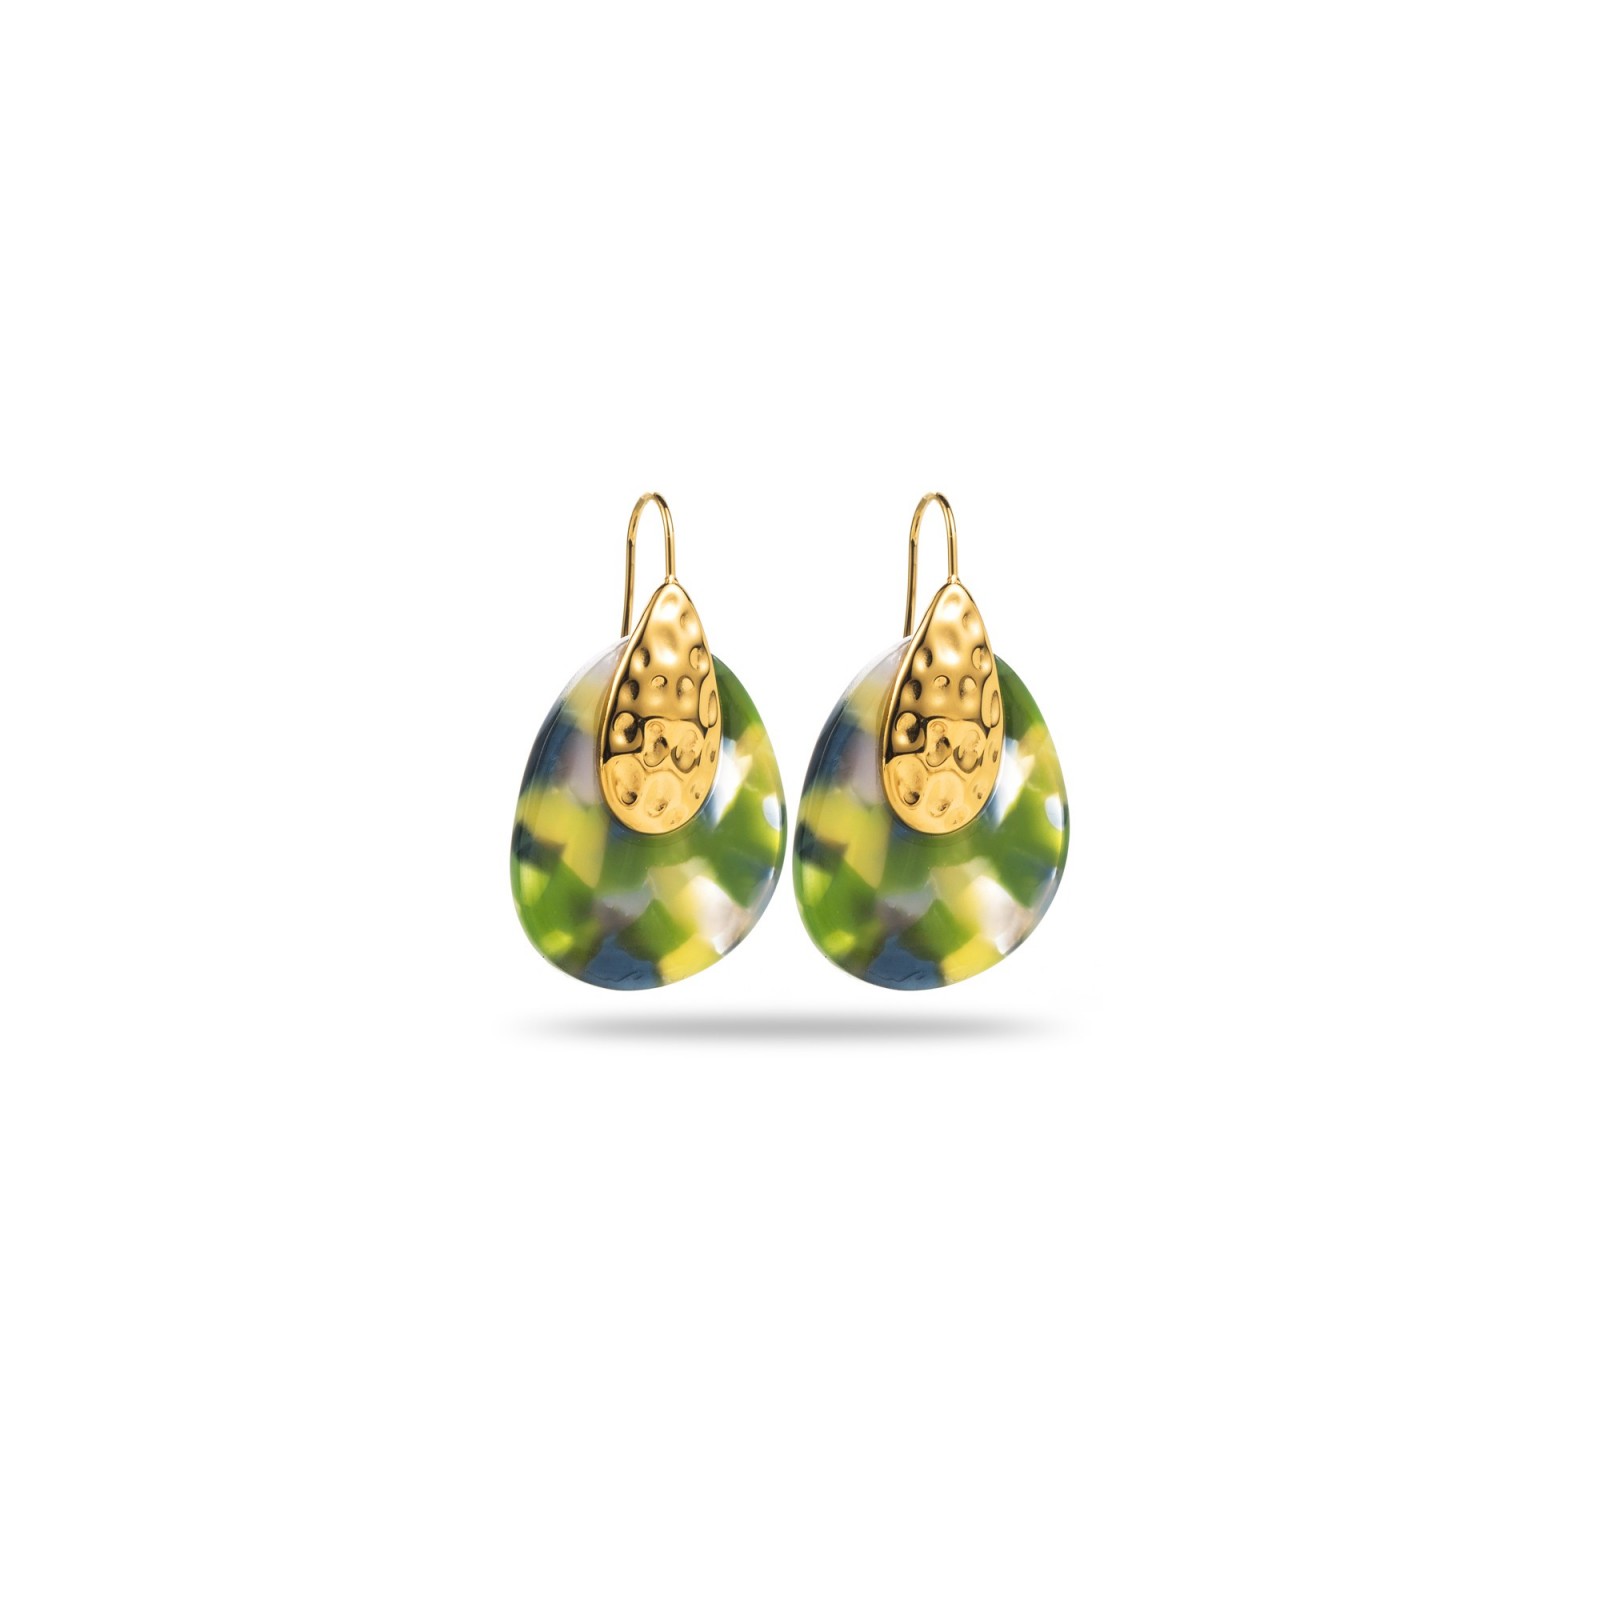 Colorful Oval Earrings with Hammered Drop Detail Color:Green Paradise